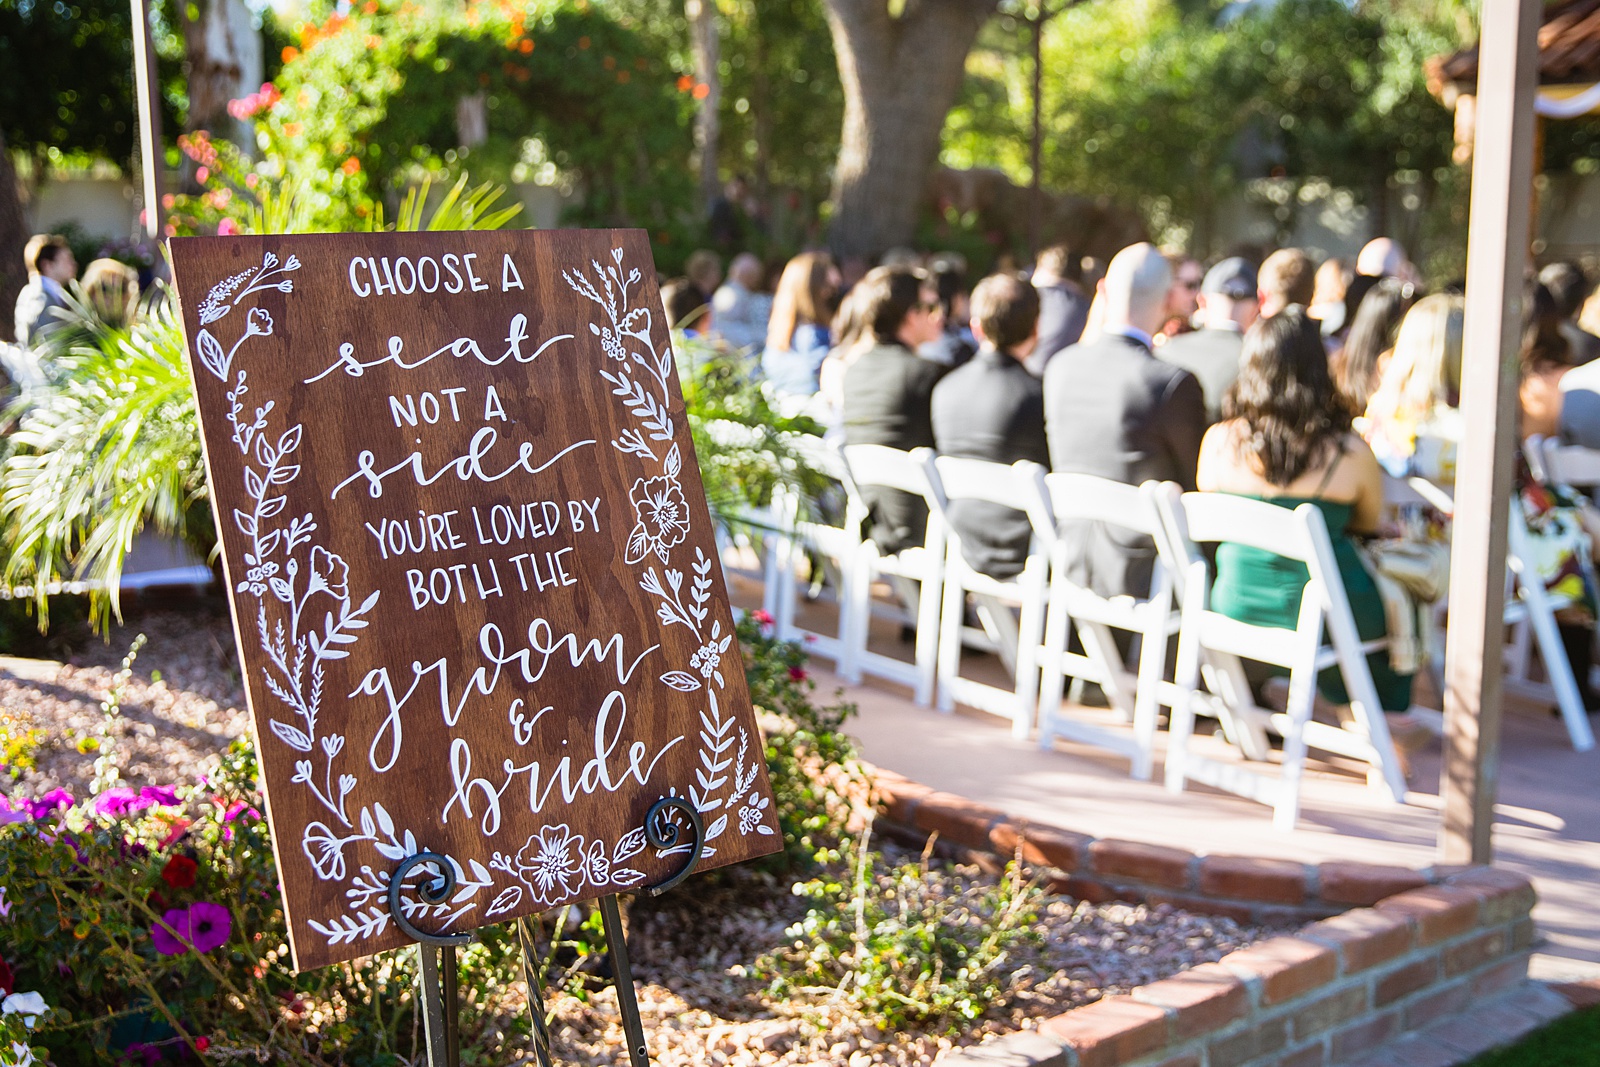 "Choose a seat not a side" rustic garden sign at a wedding ceremony by PMA photography.